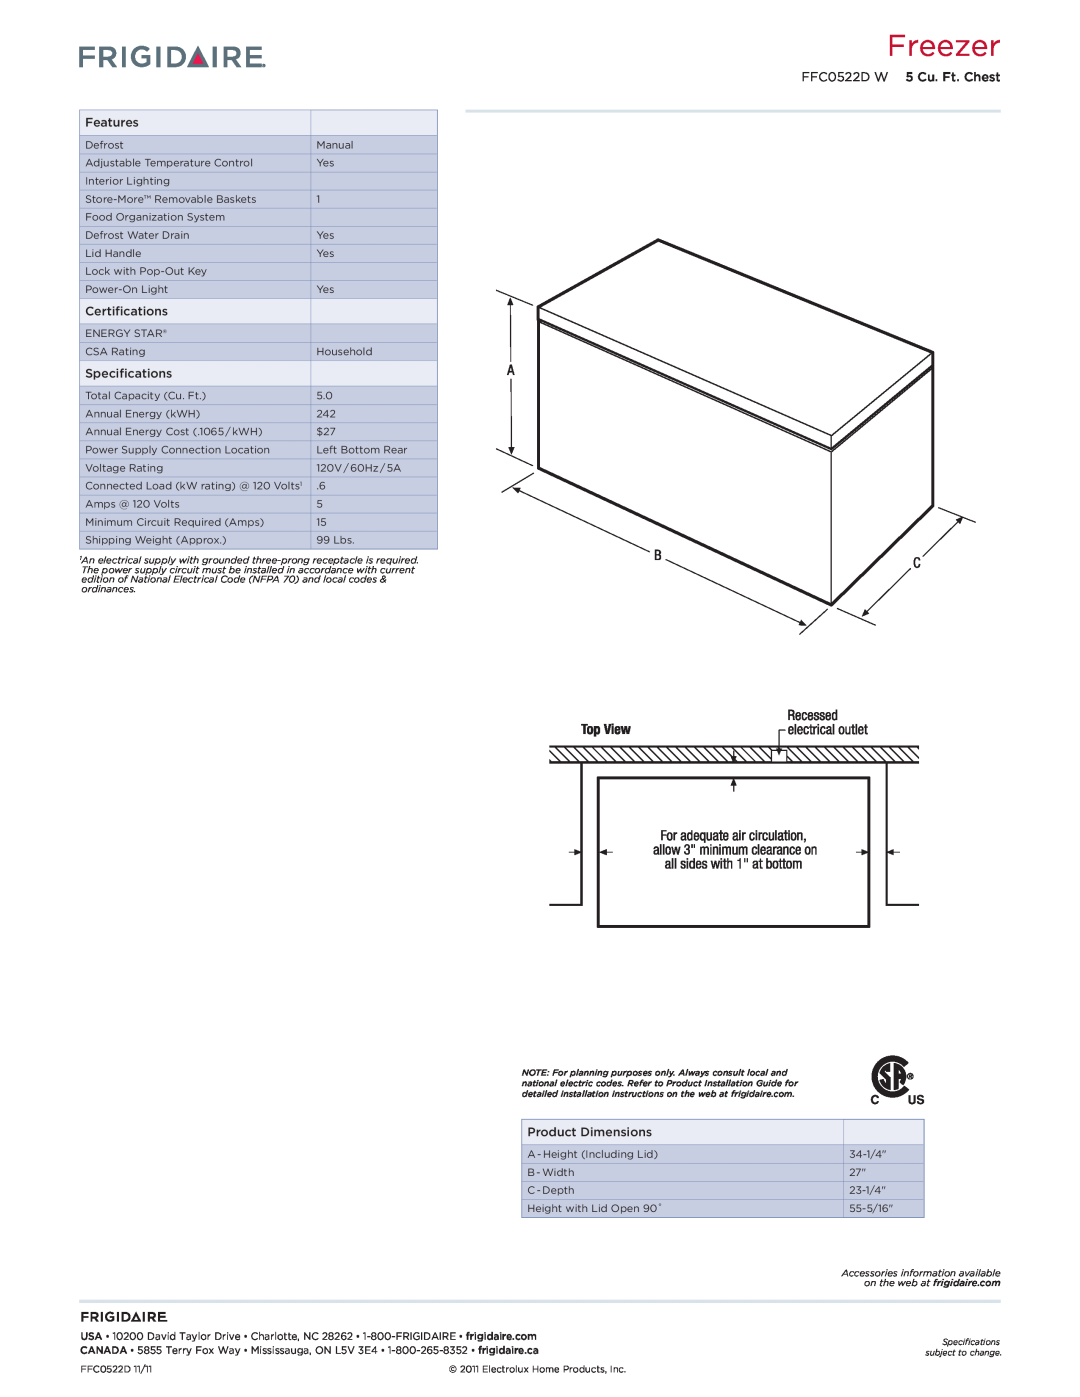 Frigidaire FFC0522D W dimensions Freezer, Features, Certifications, Specifications, Product Dimensions 